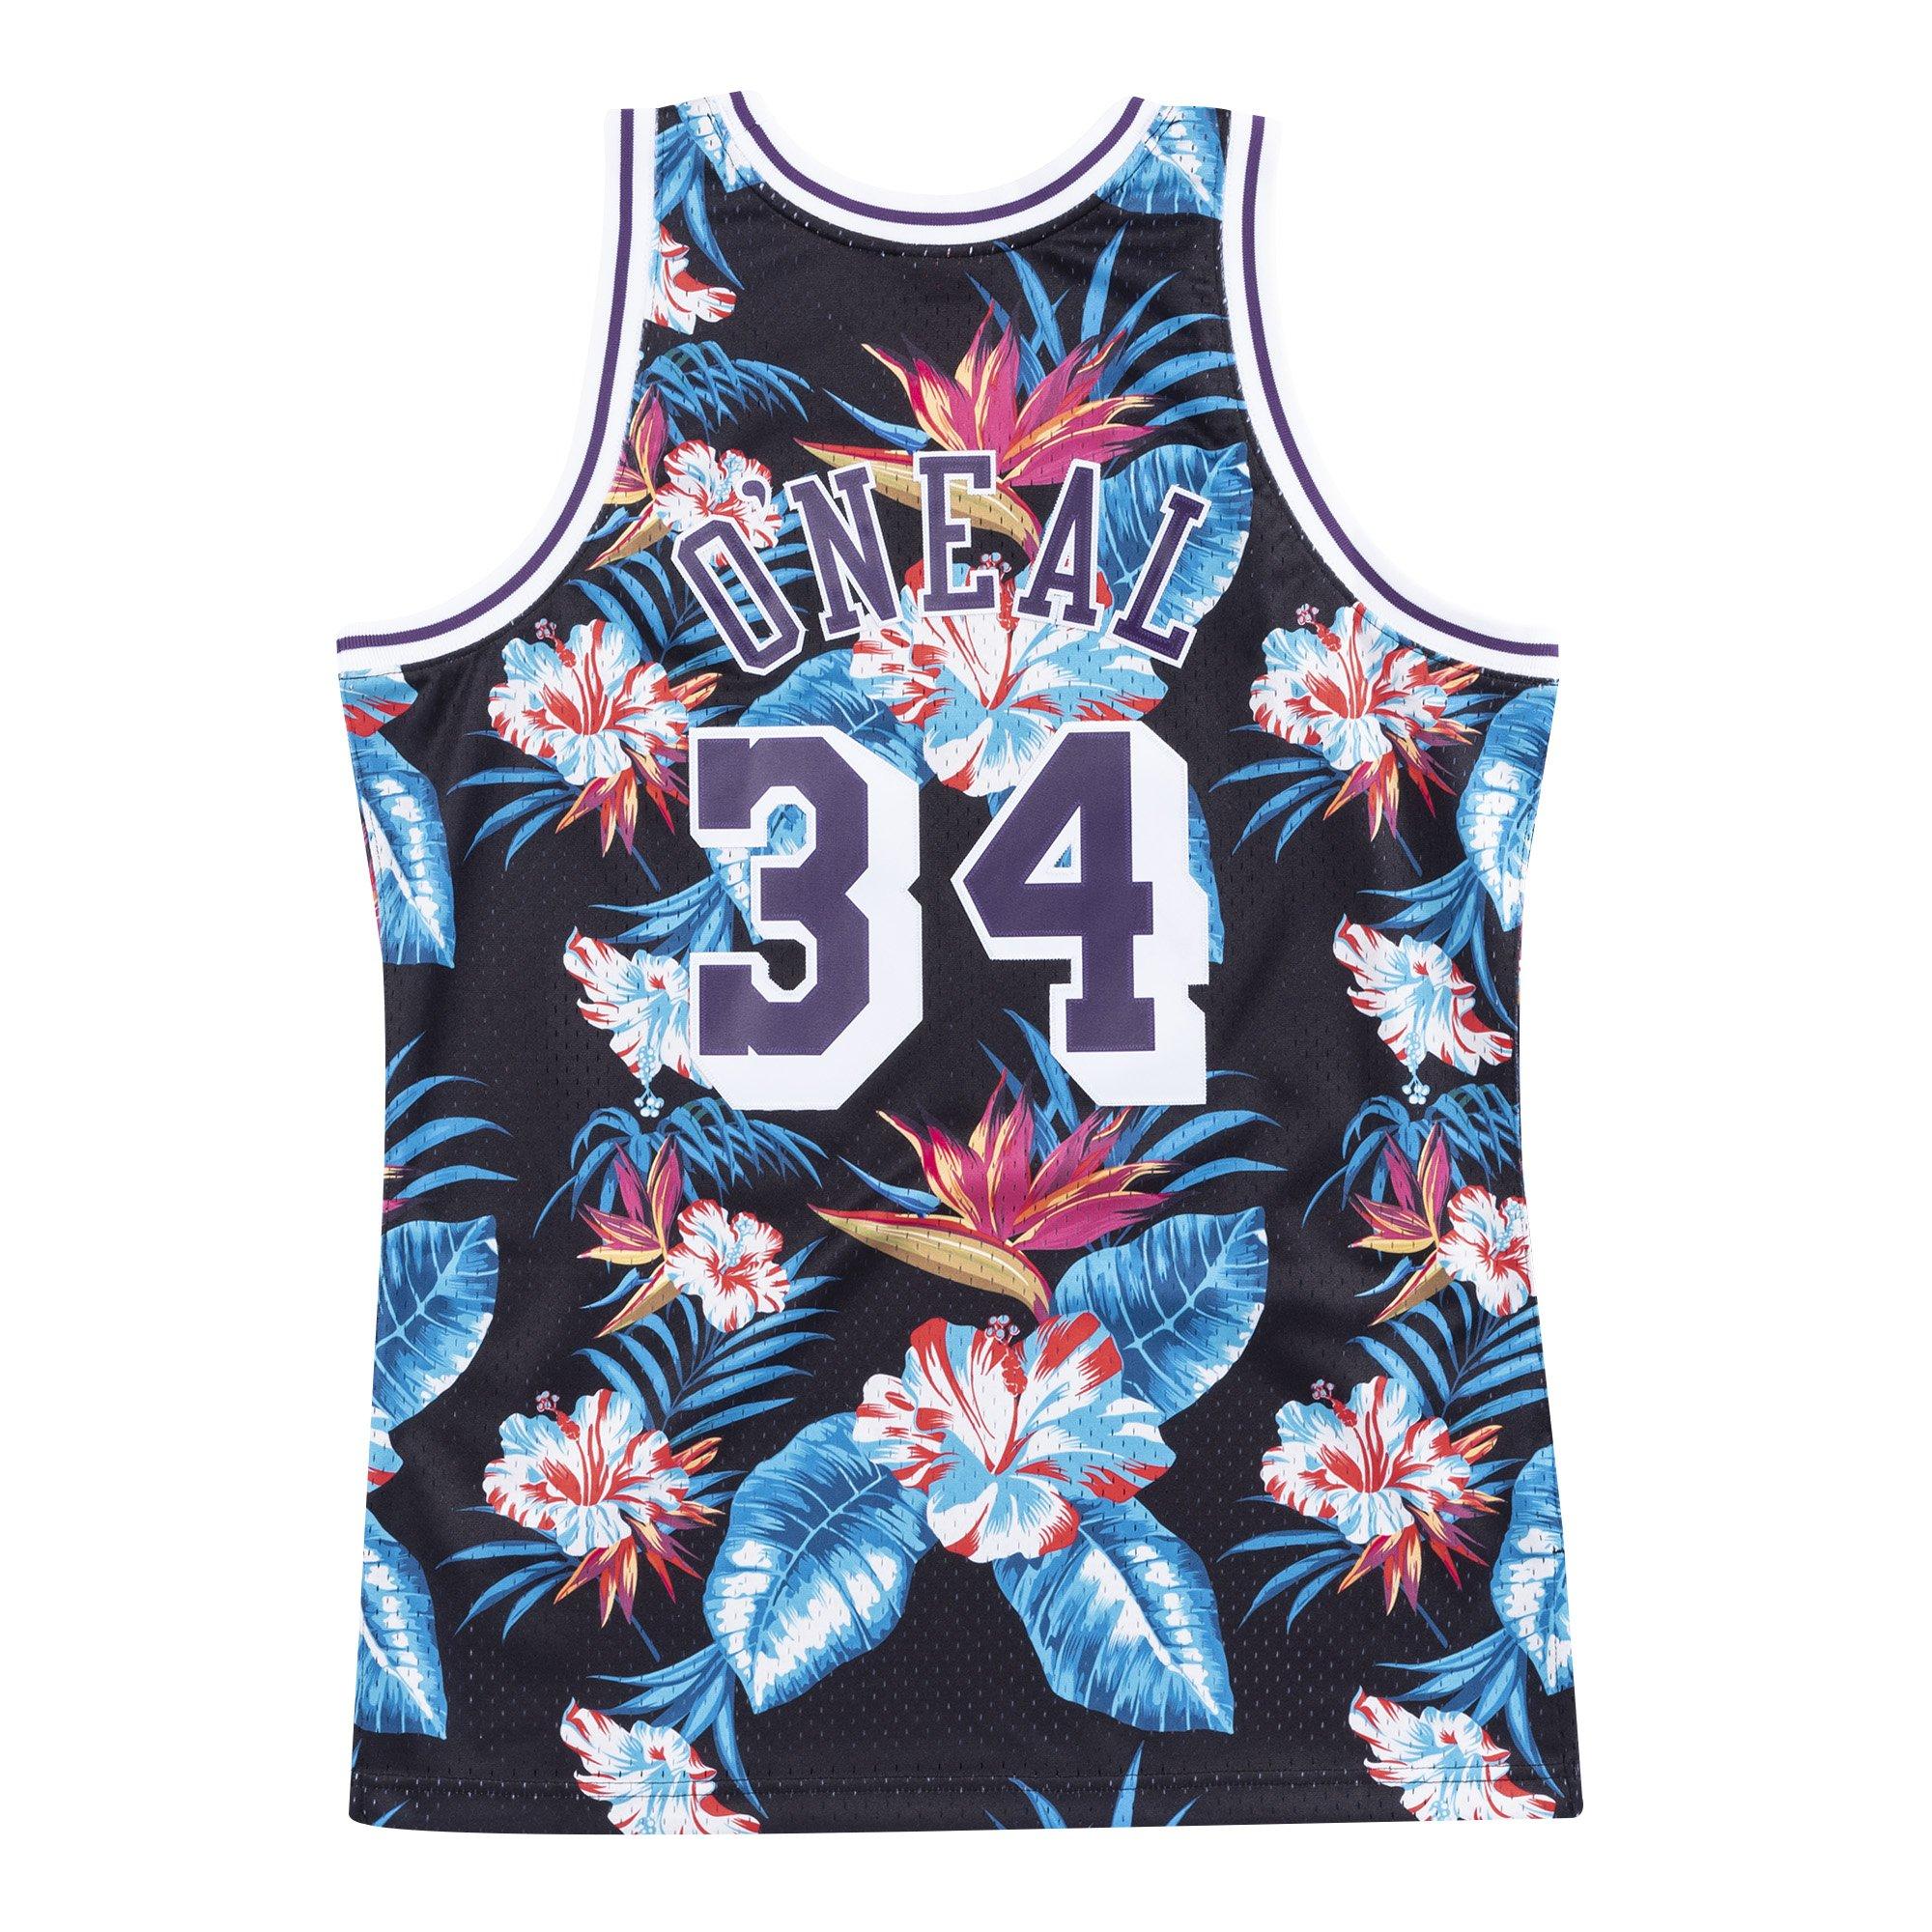 lakers floral jersey